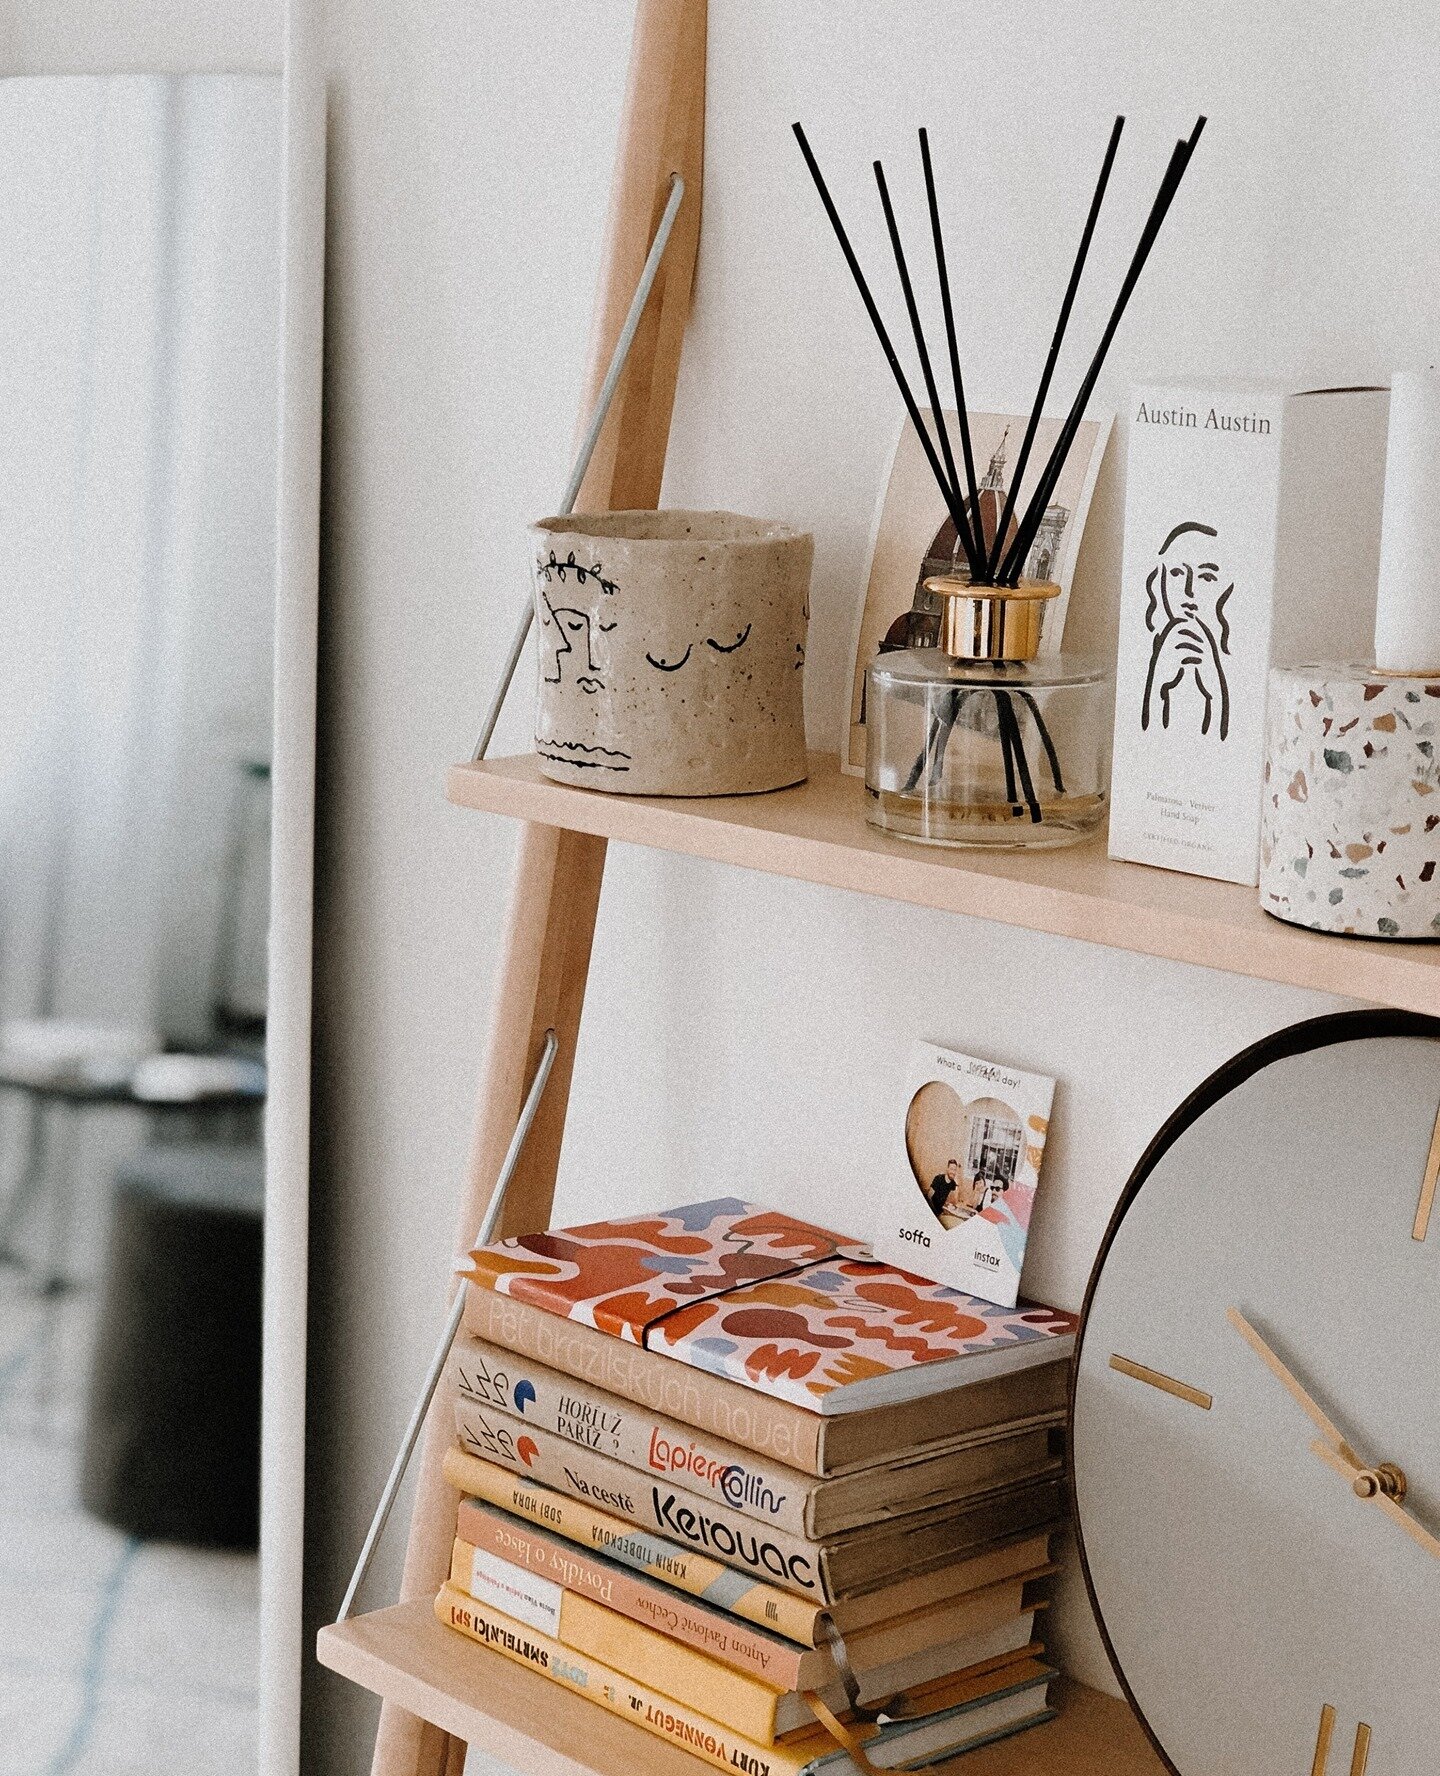 We adore the look of a space decorated with a diffuser or candle. Not only are they aesthetically beautiful, but they also bring a fresh fragrance and a sense of calm.⁠
⁠